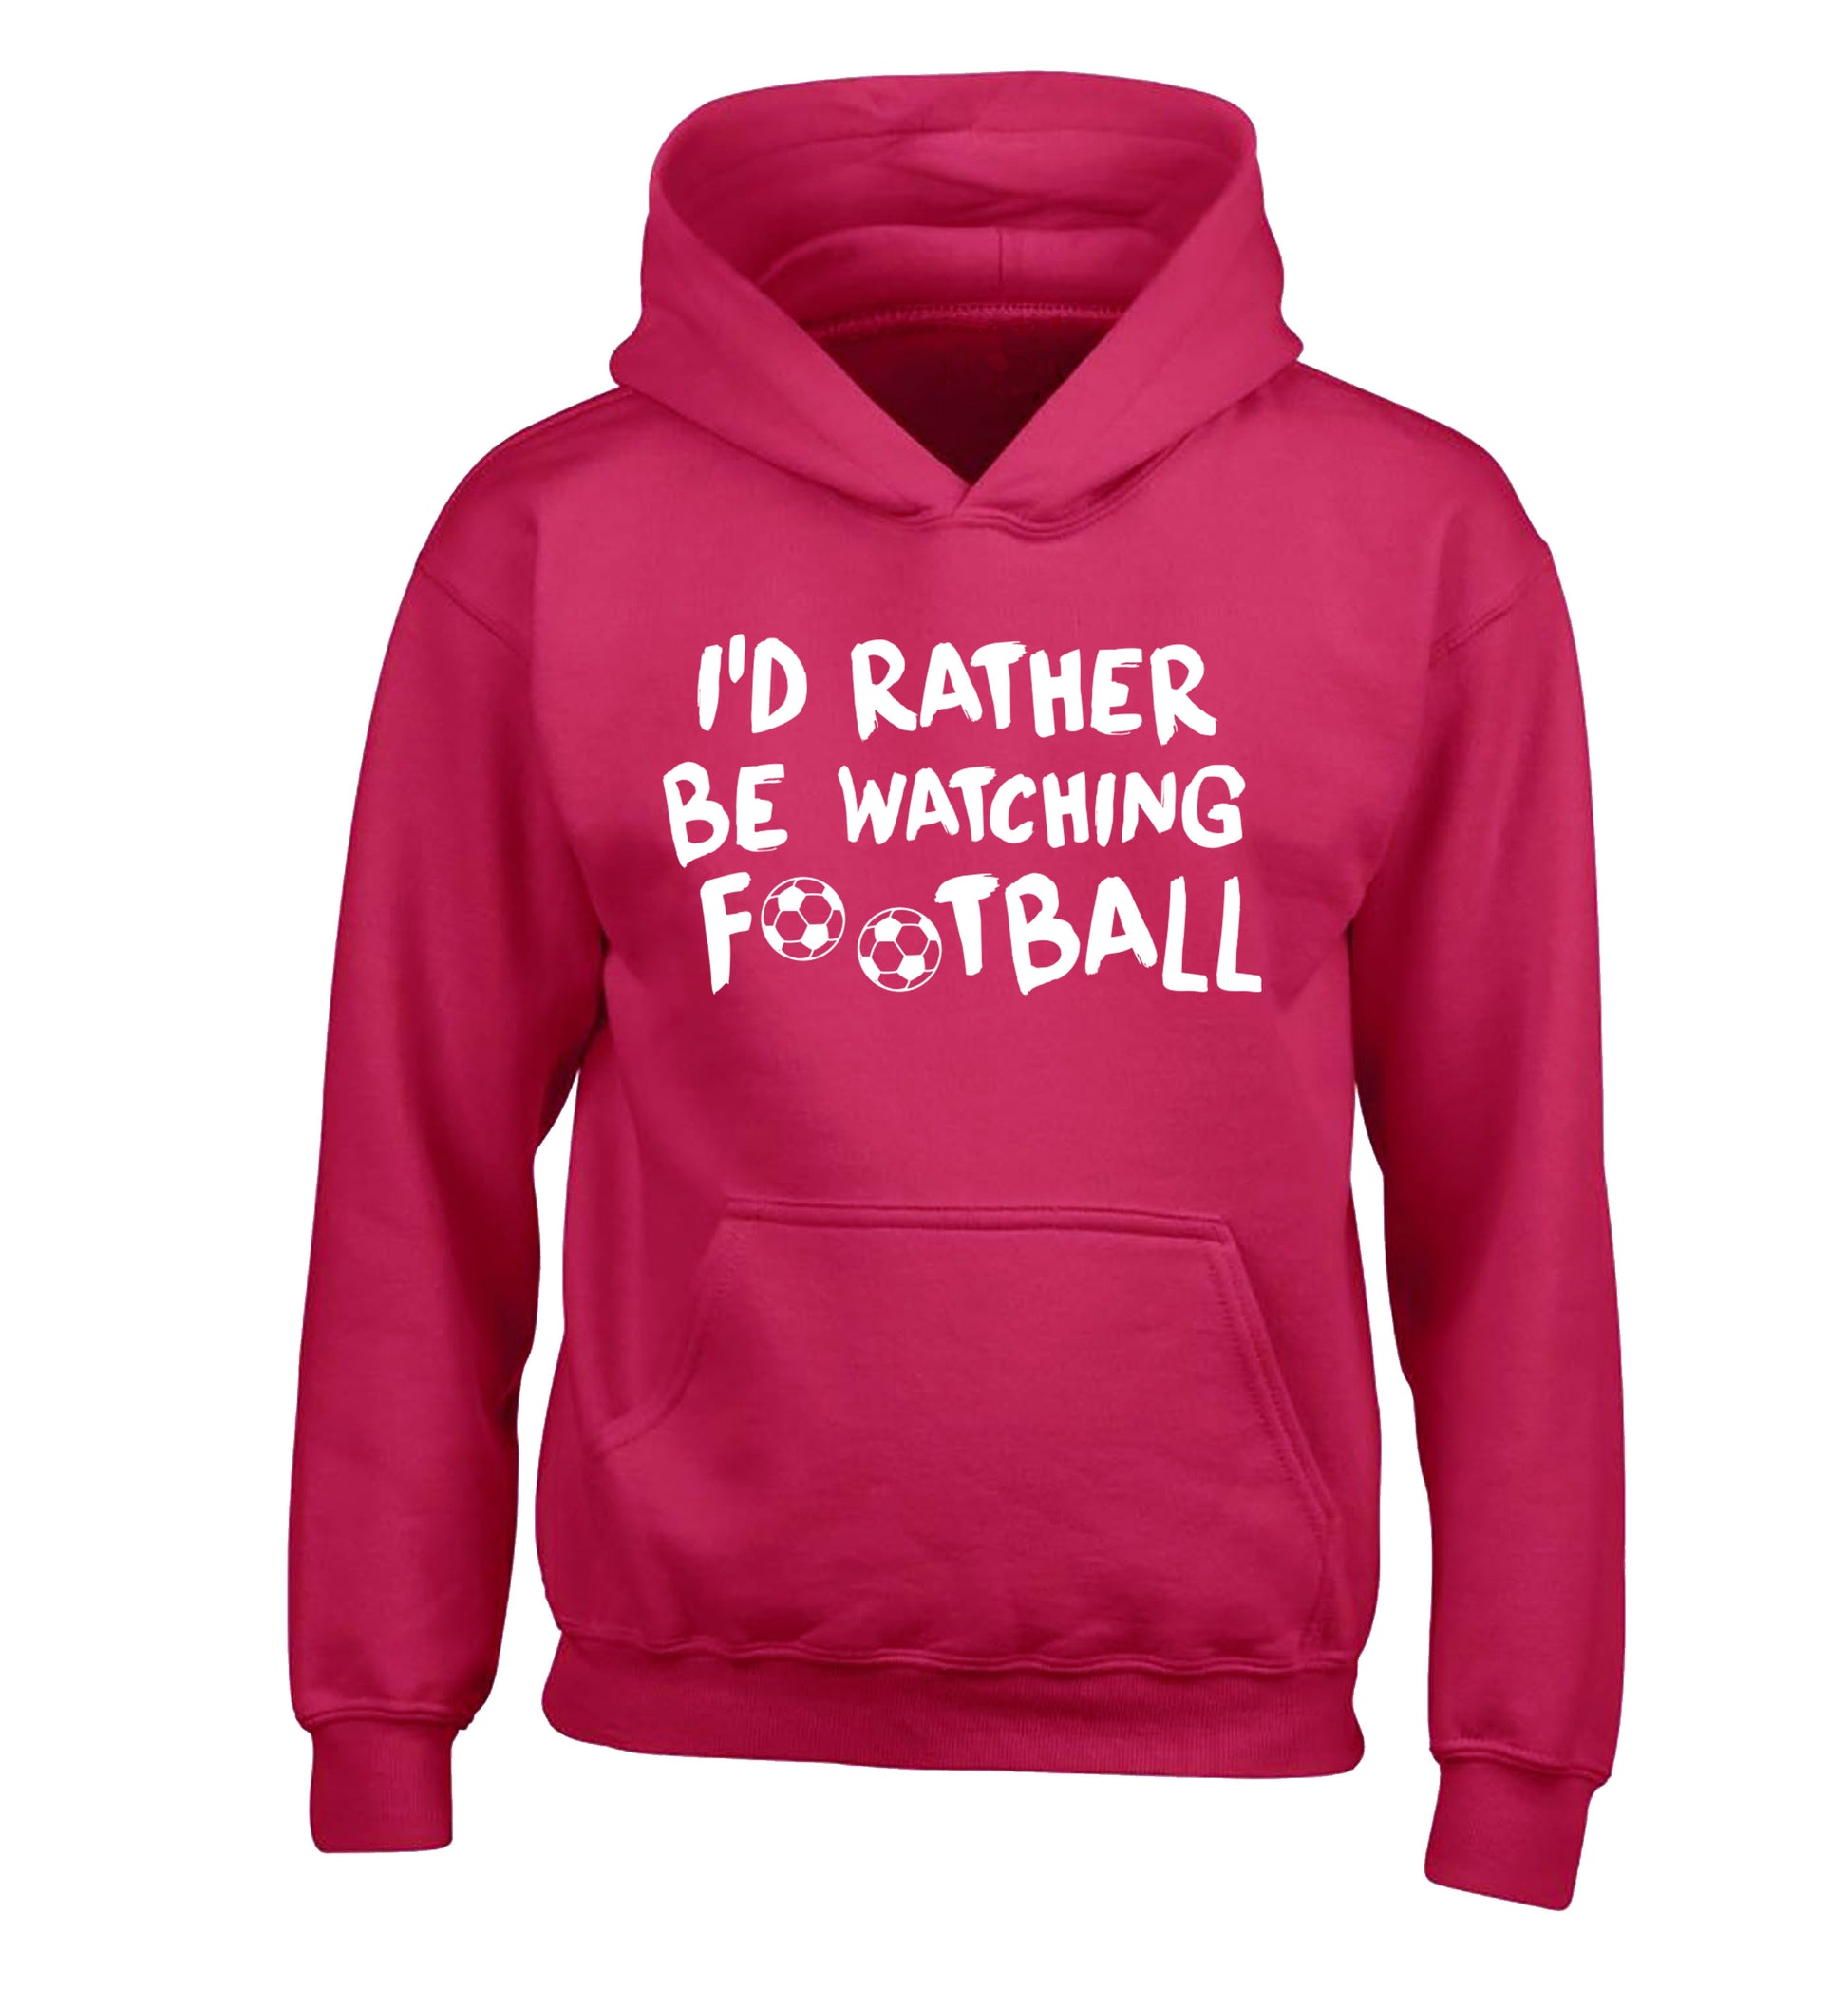 I'd rather be watching football children's pink hoodie 12-14 Years